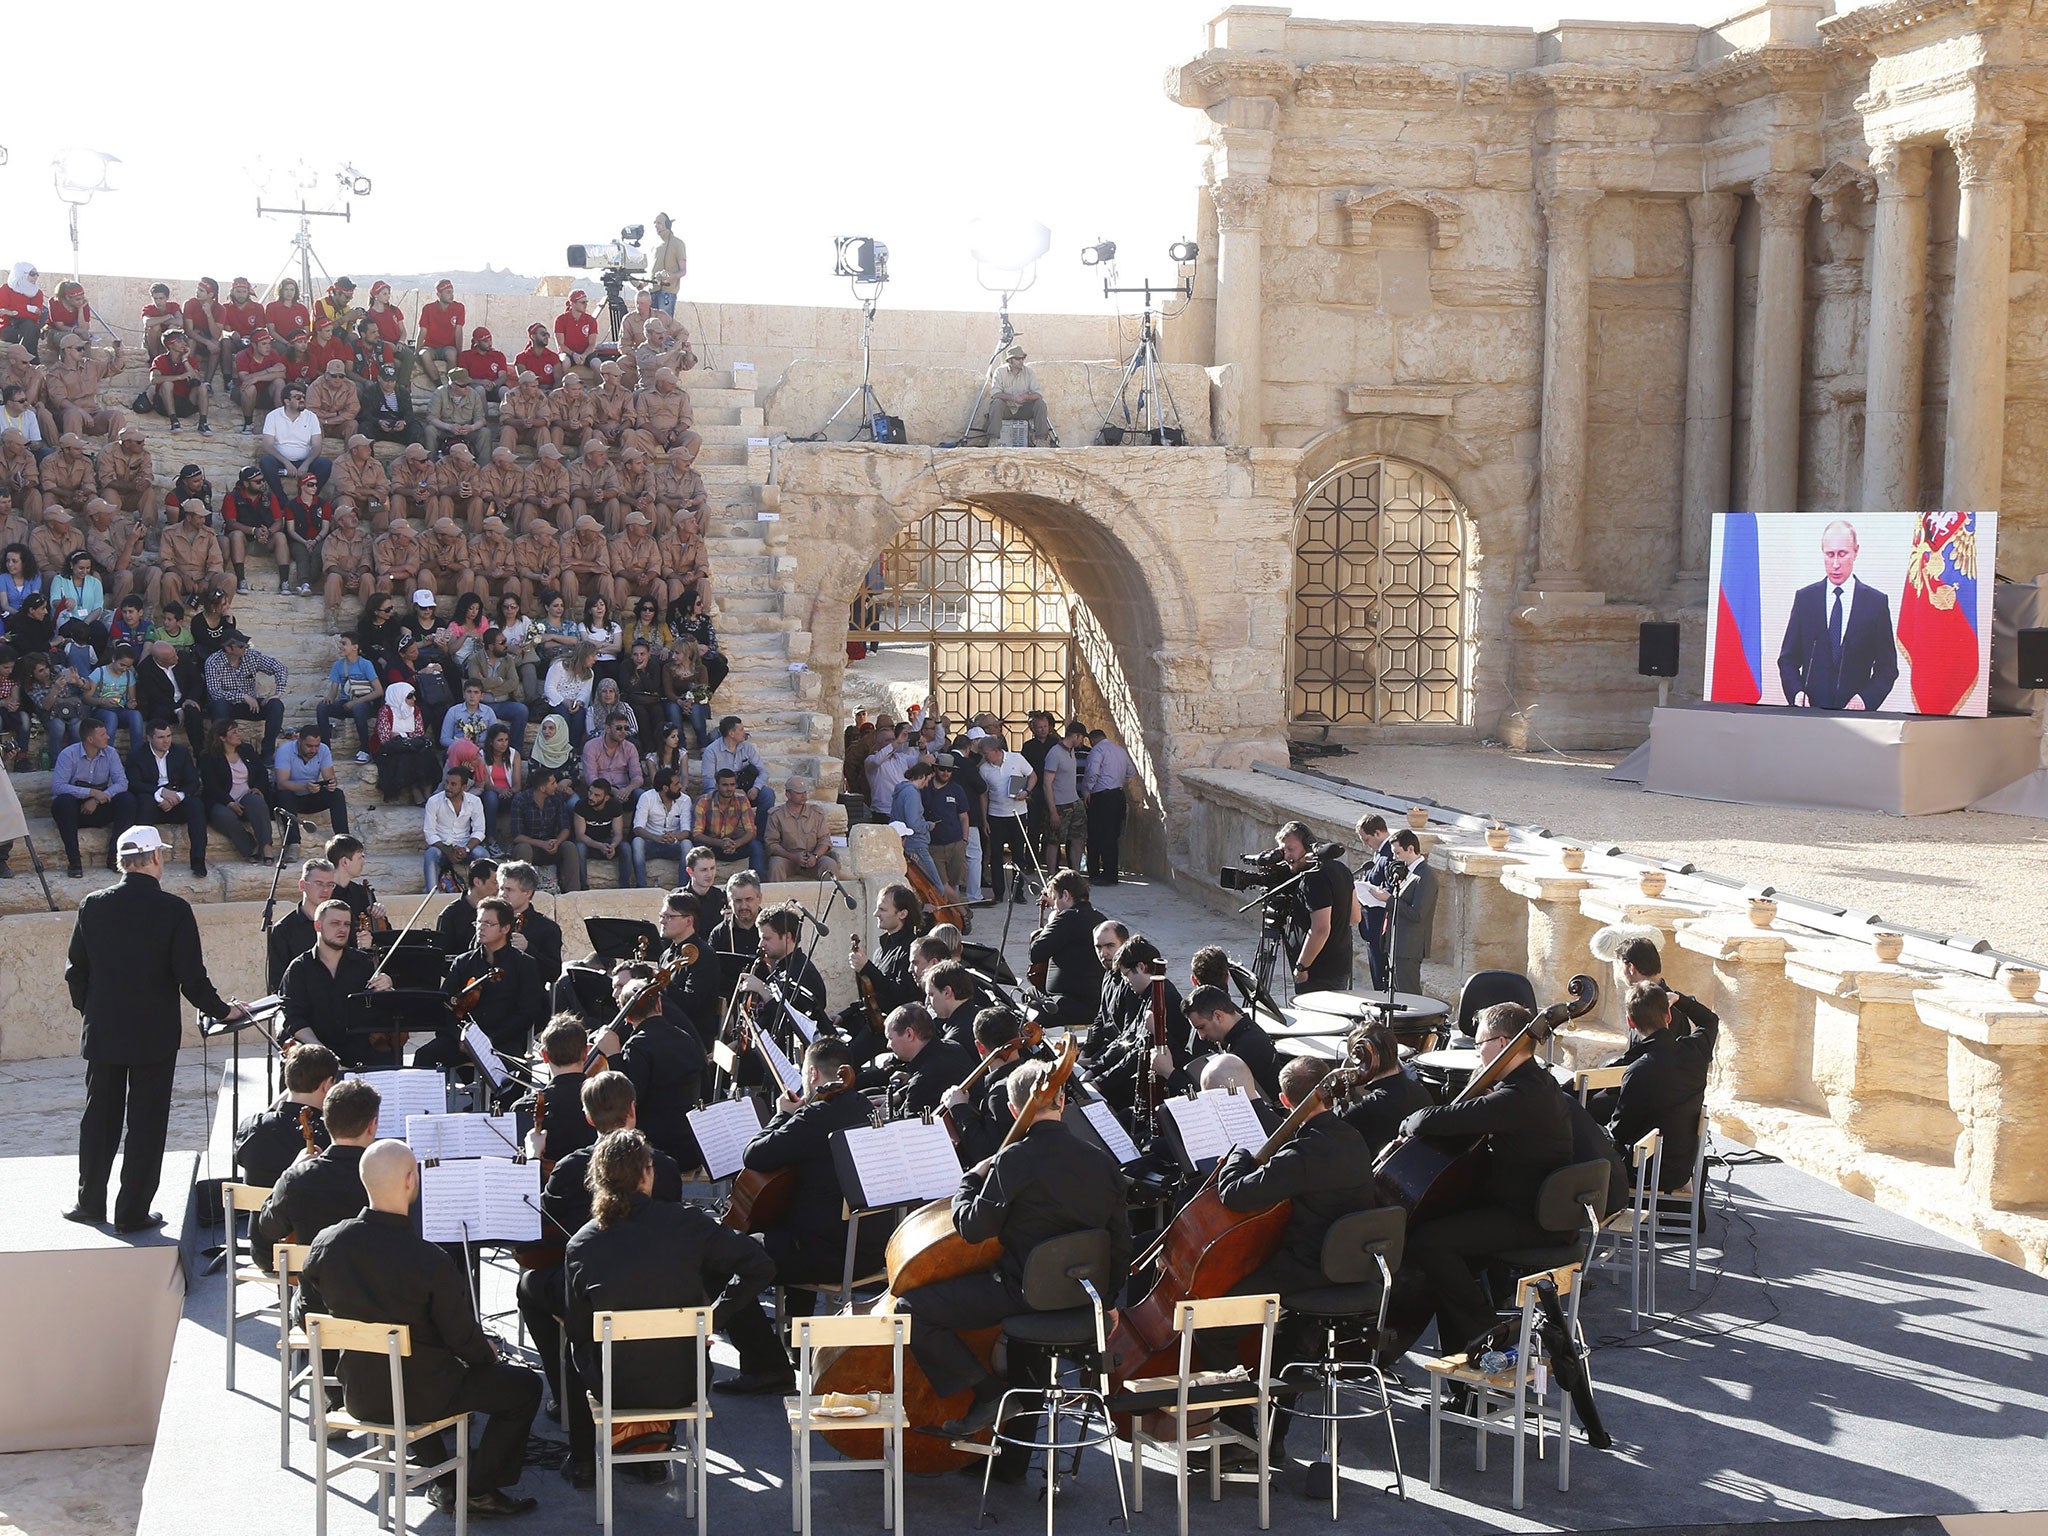 Vladimir Putin delivers a speech via live video feed during a concert by the Mariinsky Symphony Orchestra in Palmyra , Syria, 5 May 2016